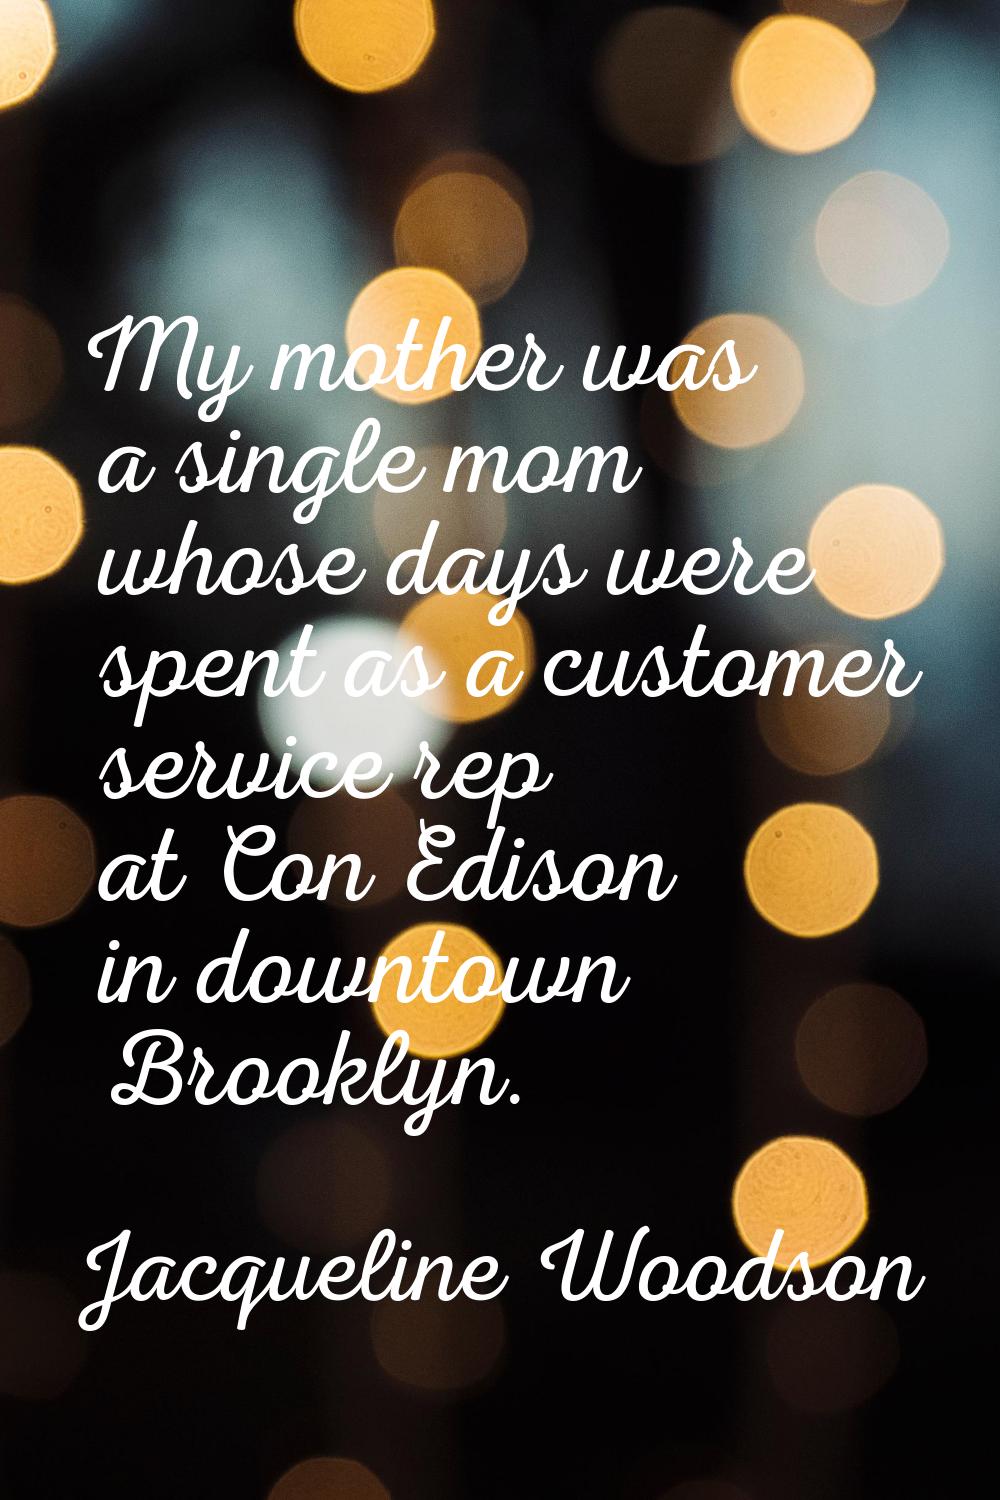 My mother was a single mom whose days were spent as a customer service rep at Con Edison in downtow